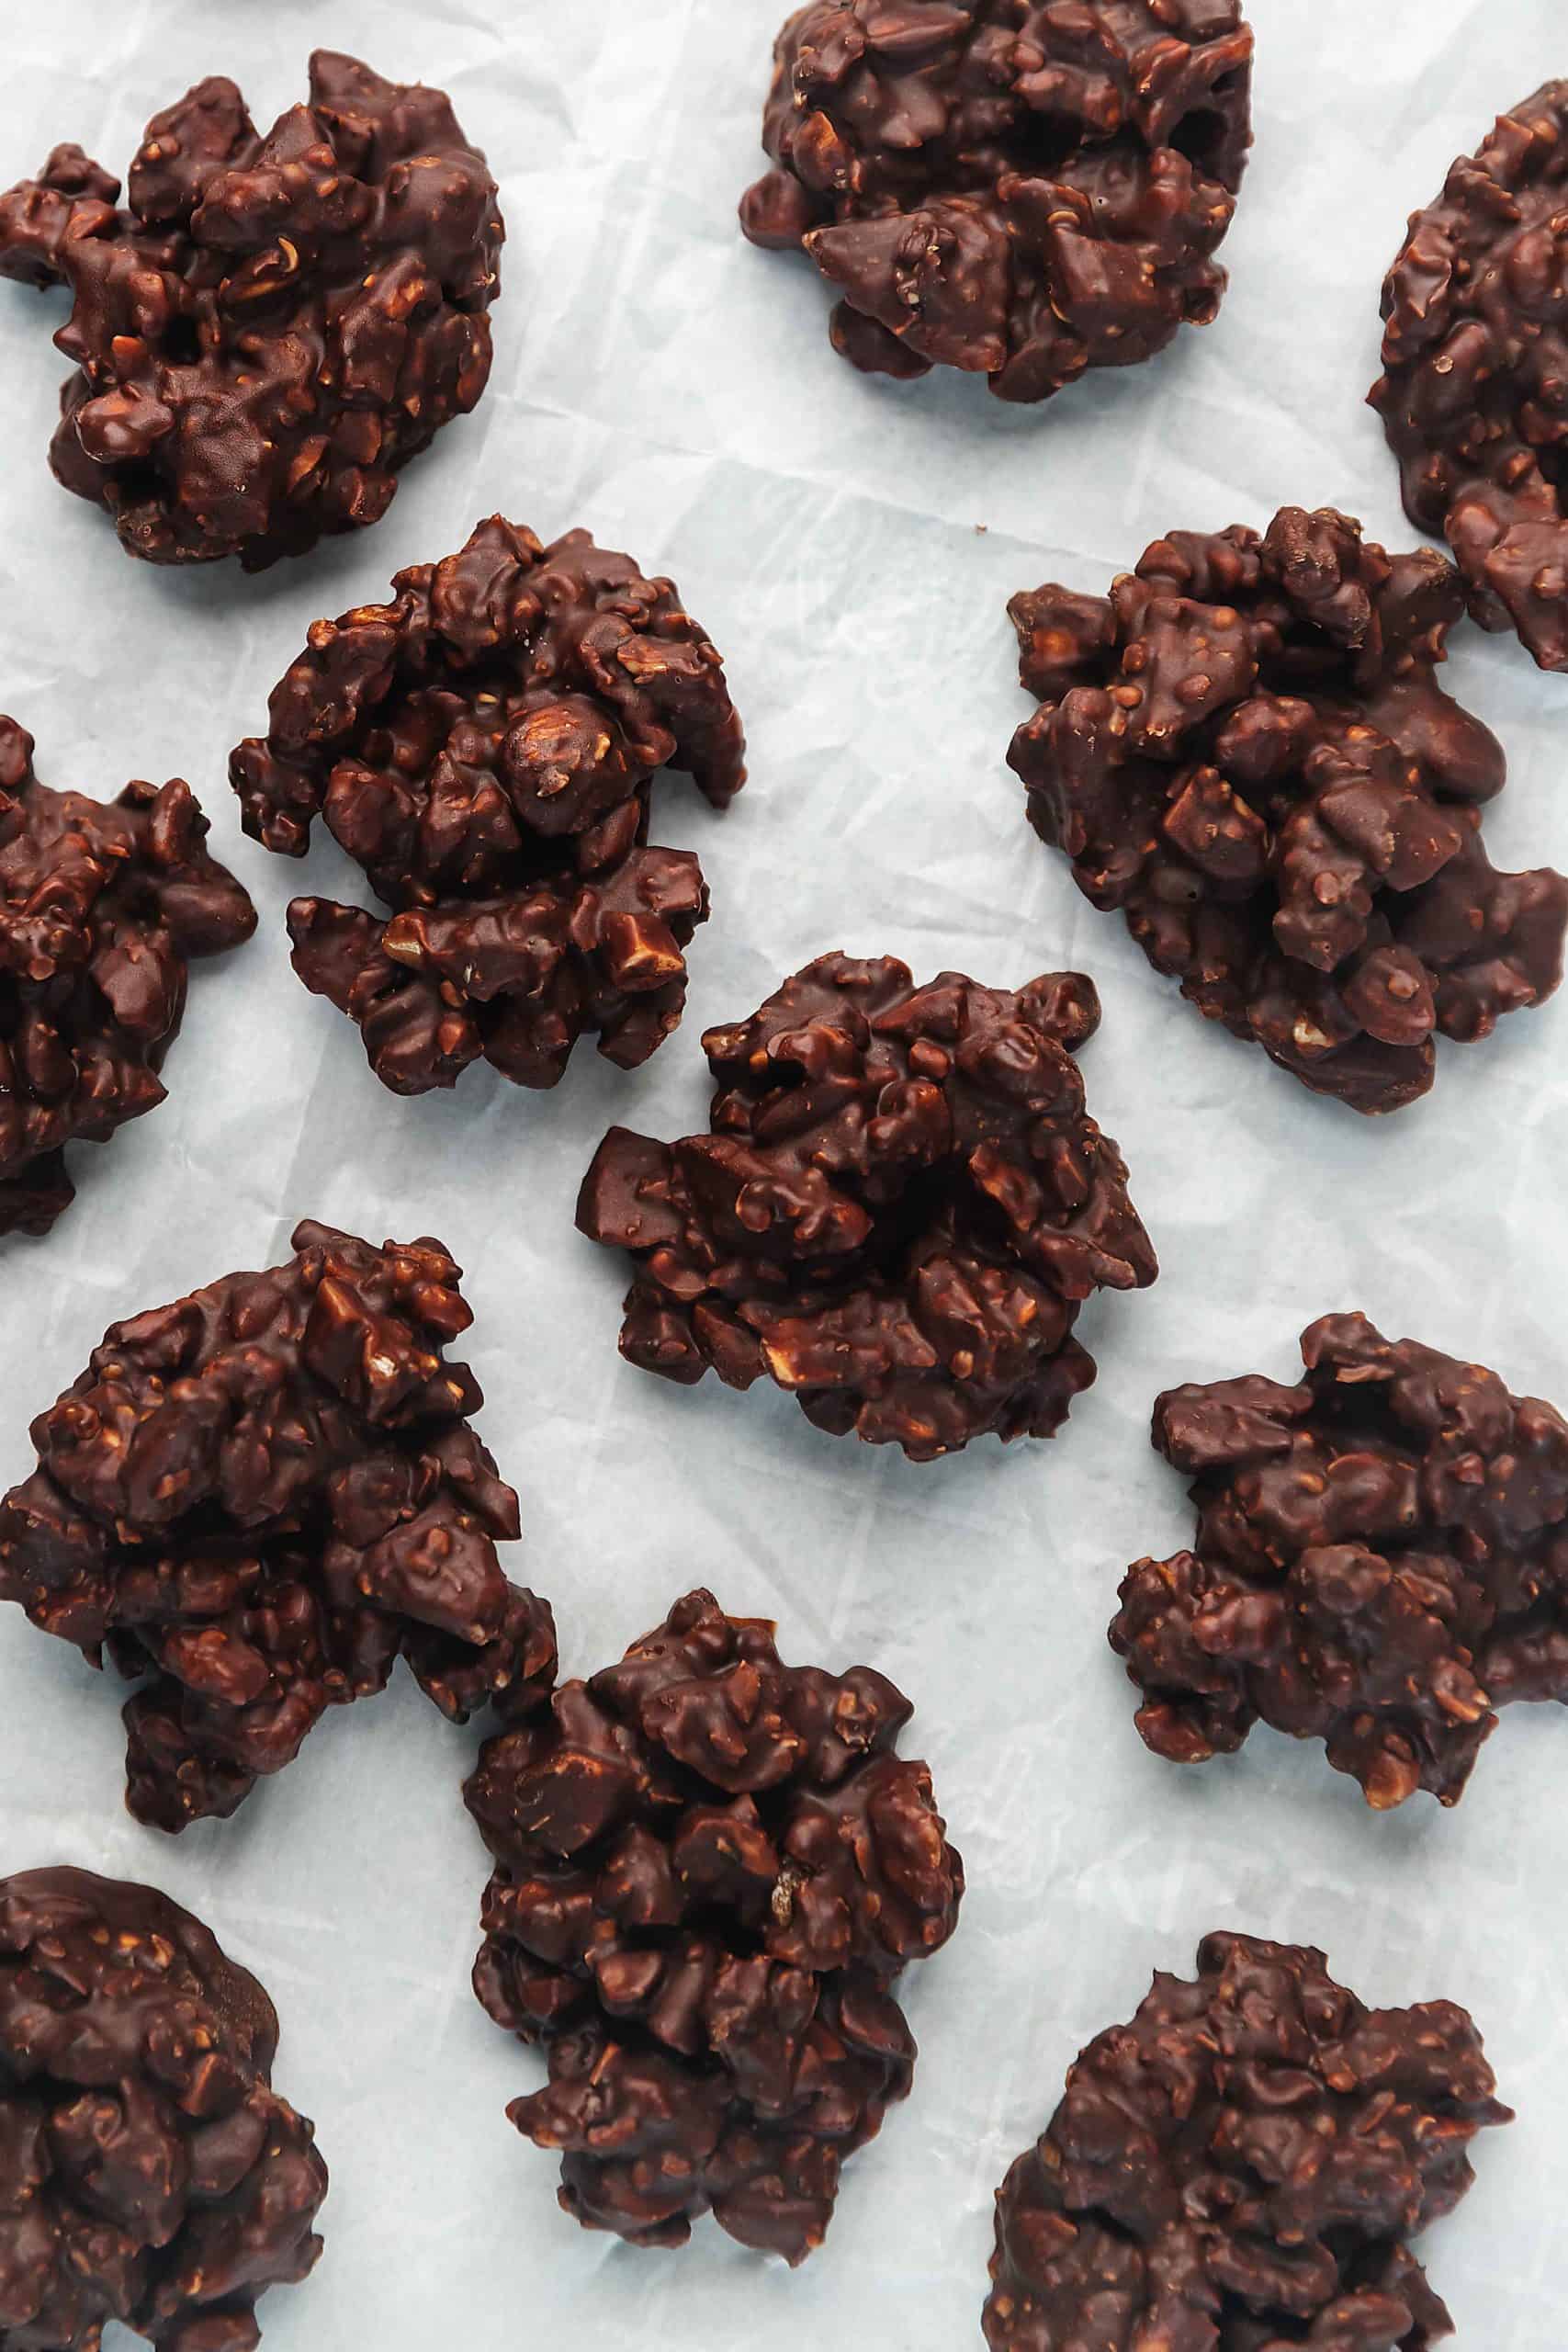 keto chocolate nut clusters on parchment paper